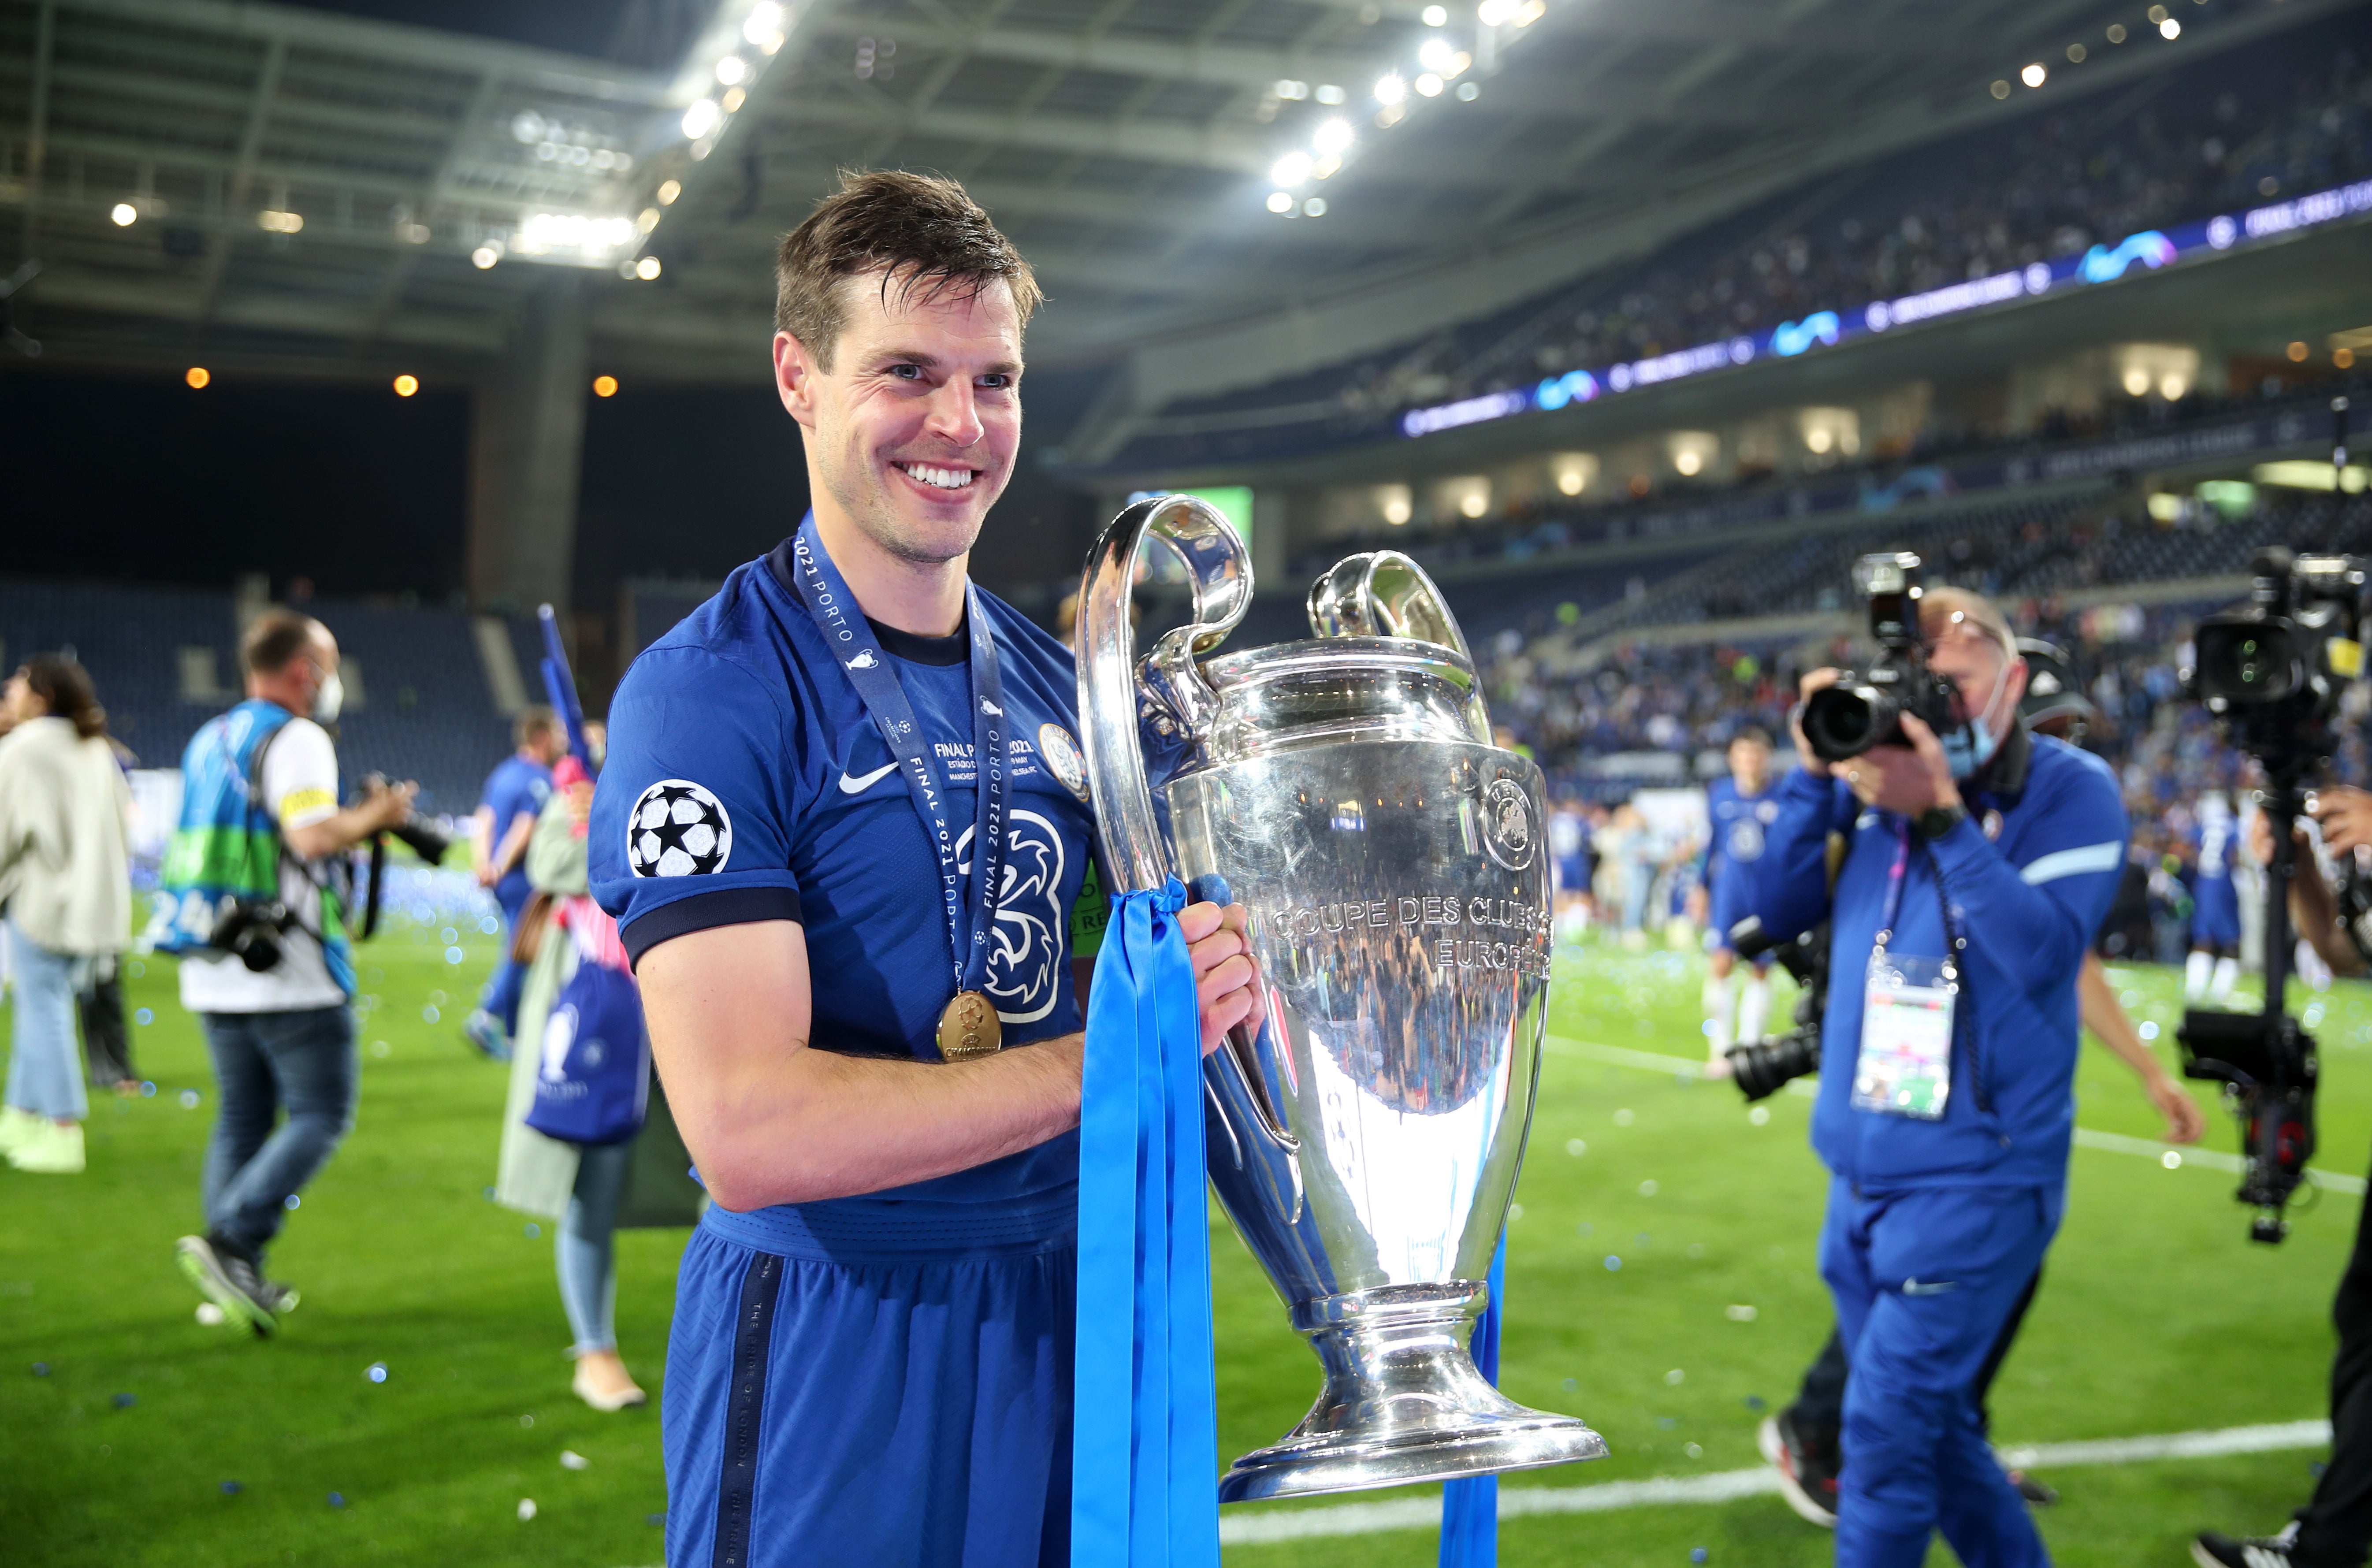 Cesar Azpilicueta captained Chelsea to European success over Manchester City in Portugal (Nick Potts/PA)